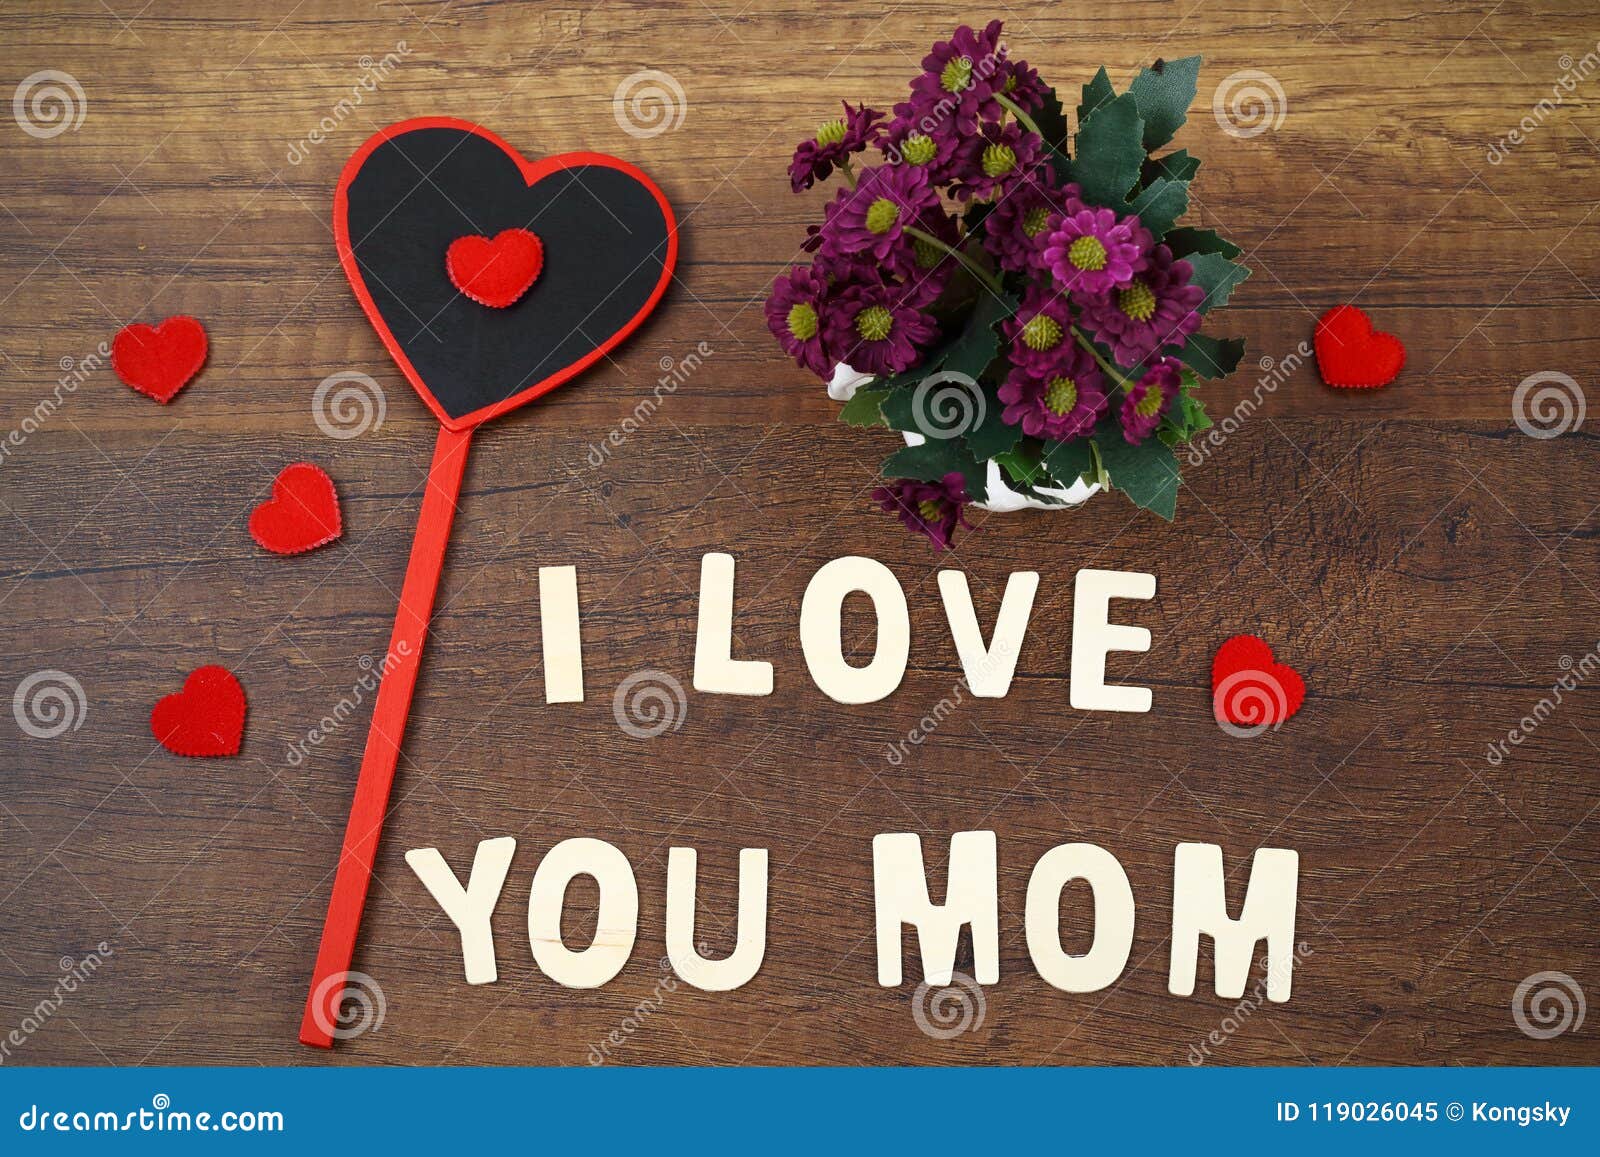 1 073 I Love You Mom Photos Free Royalty Free Stock Photos From Dreamstime